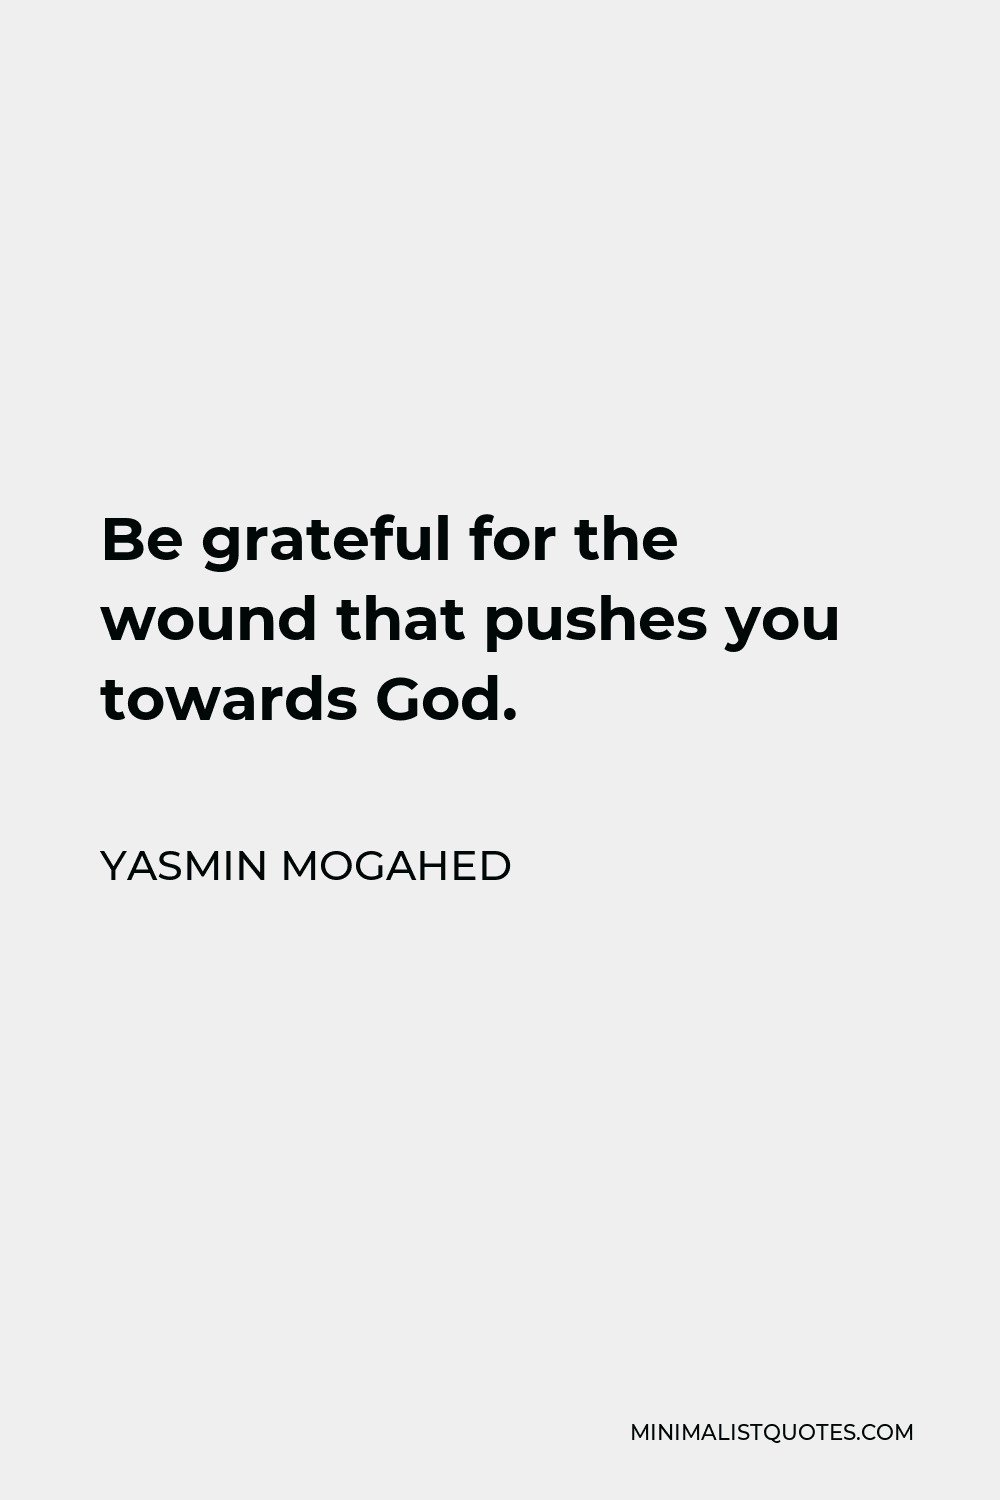 Yasmin Mogahed Quote: “Be grateful for the wound that pushes you towards  God.”